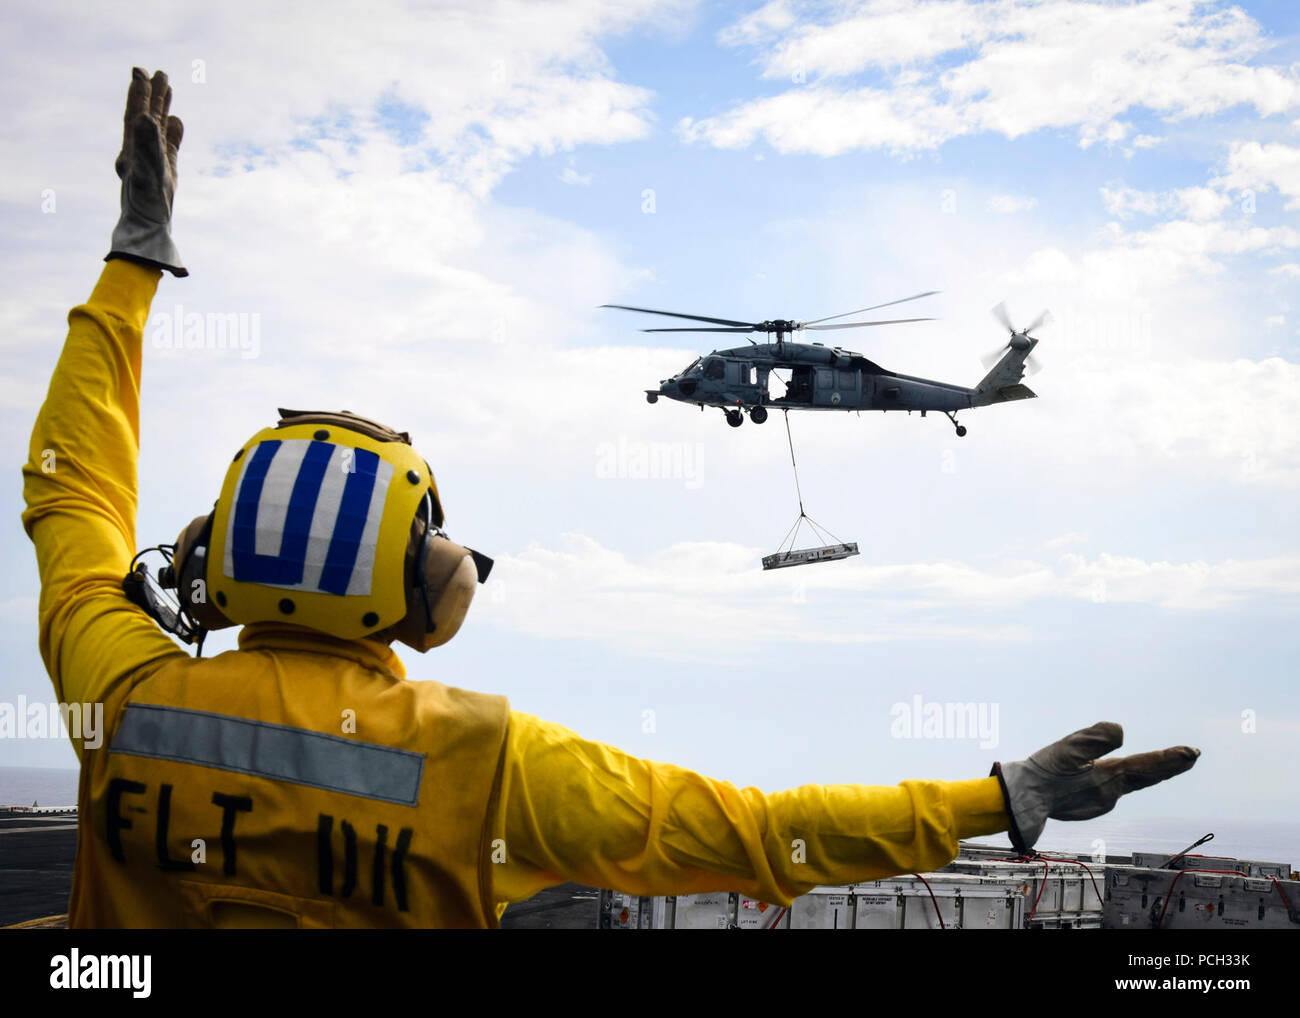 PACIFIC OCEAN (Oct. 24, 2016) A Sailor assigned to USS Nimitz (CVN 68) directs an MH-60S Sea Hawk from the Eightballers of Helicopter Sea Combat Squadron (HSC) 8 during an at-sea ammunition onload with the dry cargo/ammunition ship USNS Wally Schirra (T-AKE 8). Nimitz is underway conducting an ordnance-handling evolution in preparation for an upcoming 2017 deployment. Stock Photo